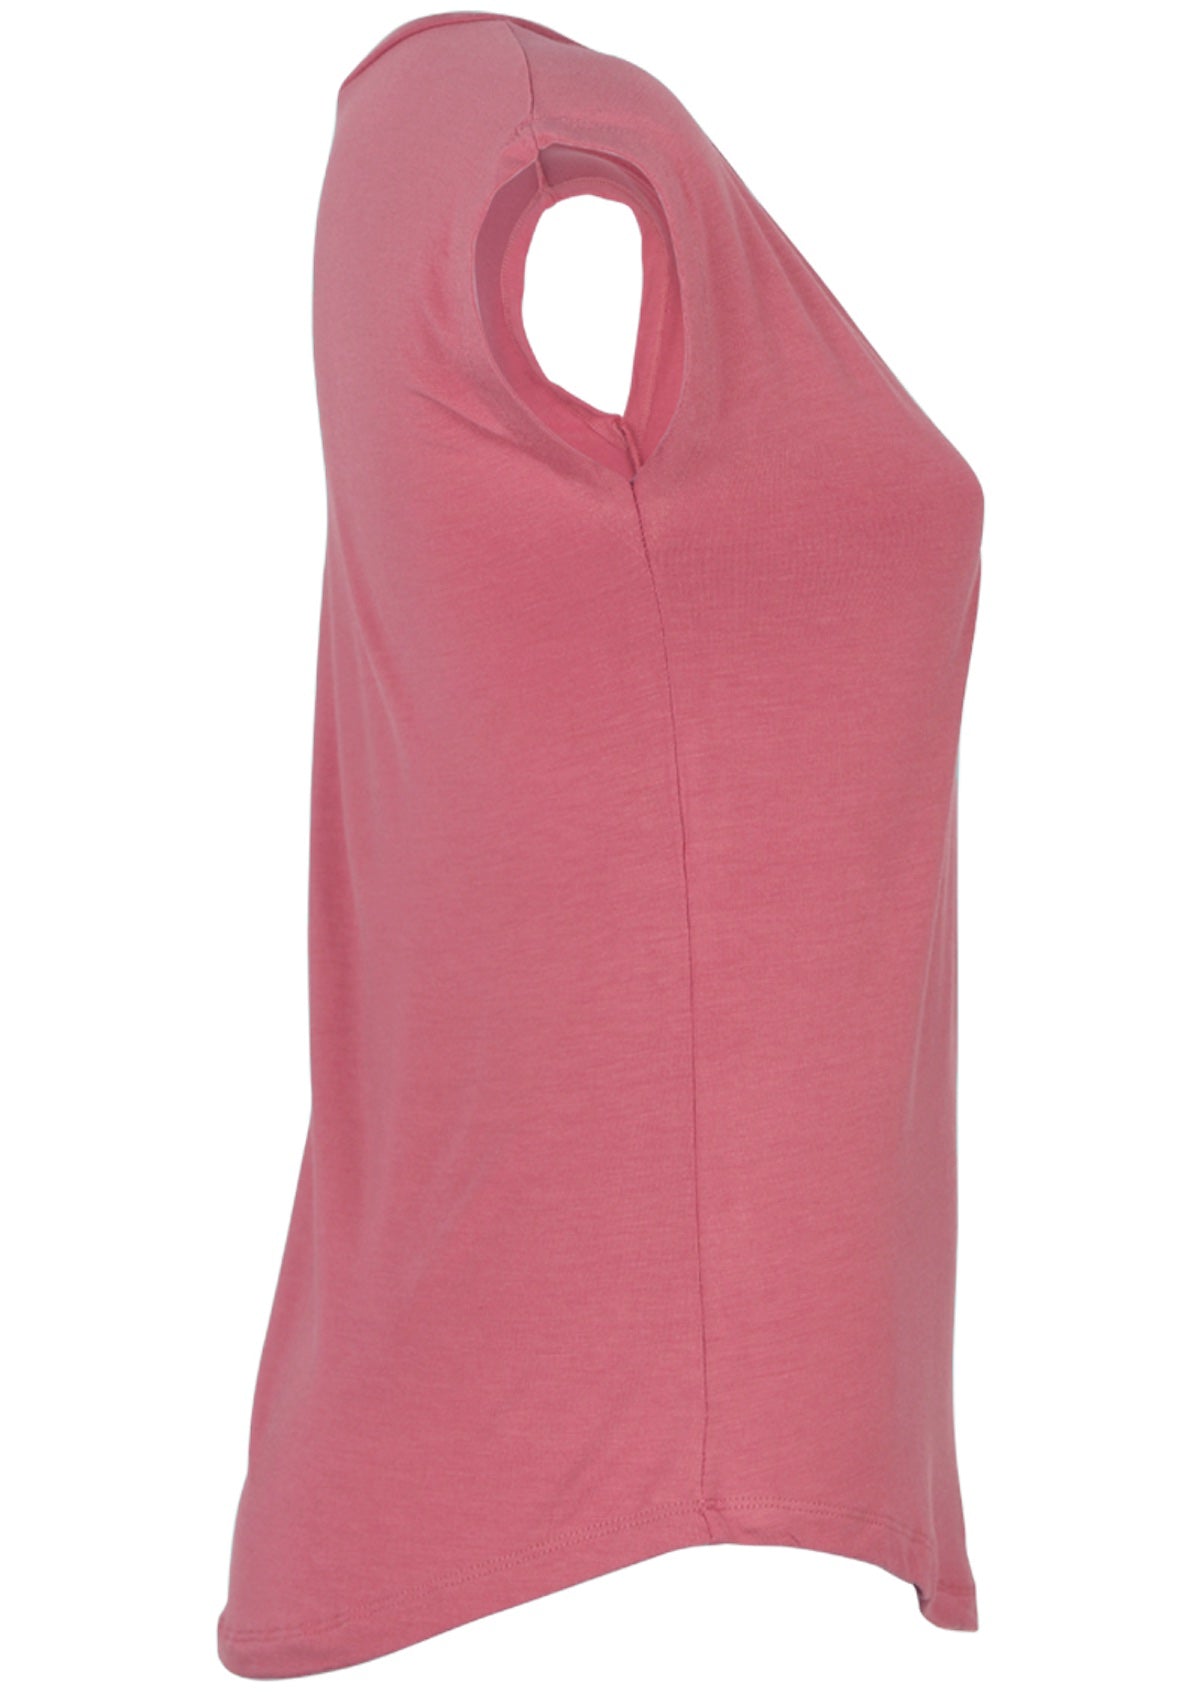 Side view of a women's pink v-neck short cap sleeve rayon top